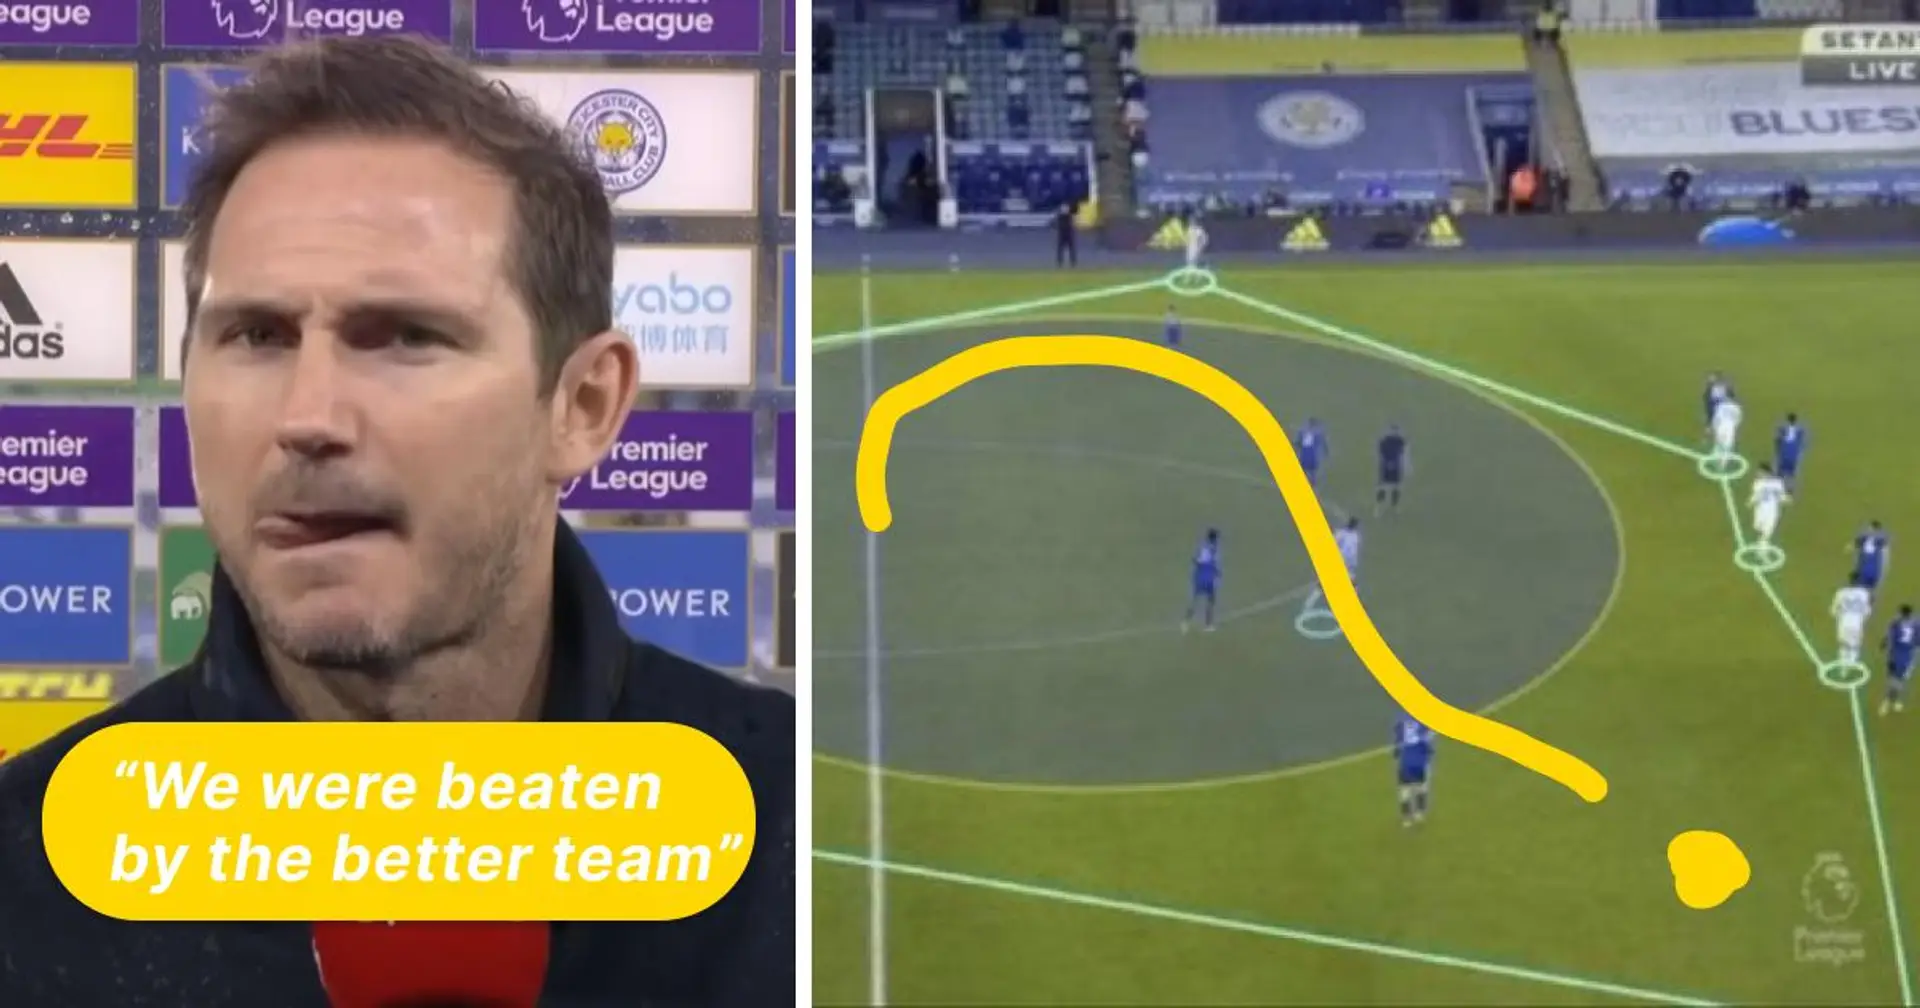 How did Frank Lampard fare in his last Premier League game with Chelsea before sacking? Recalled